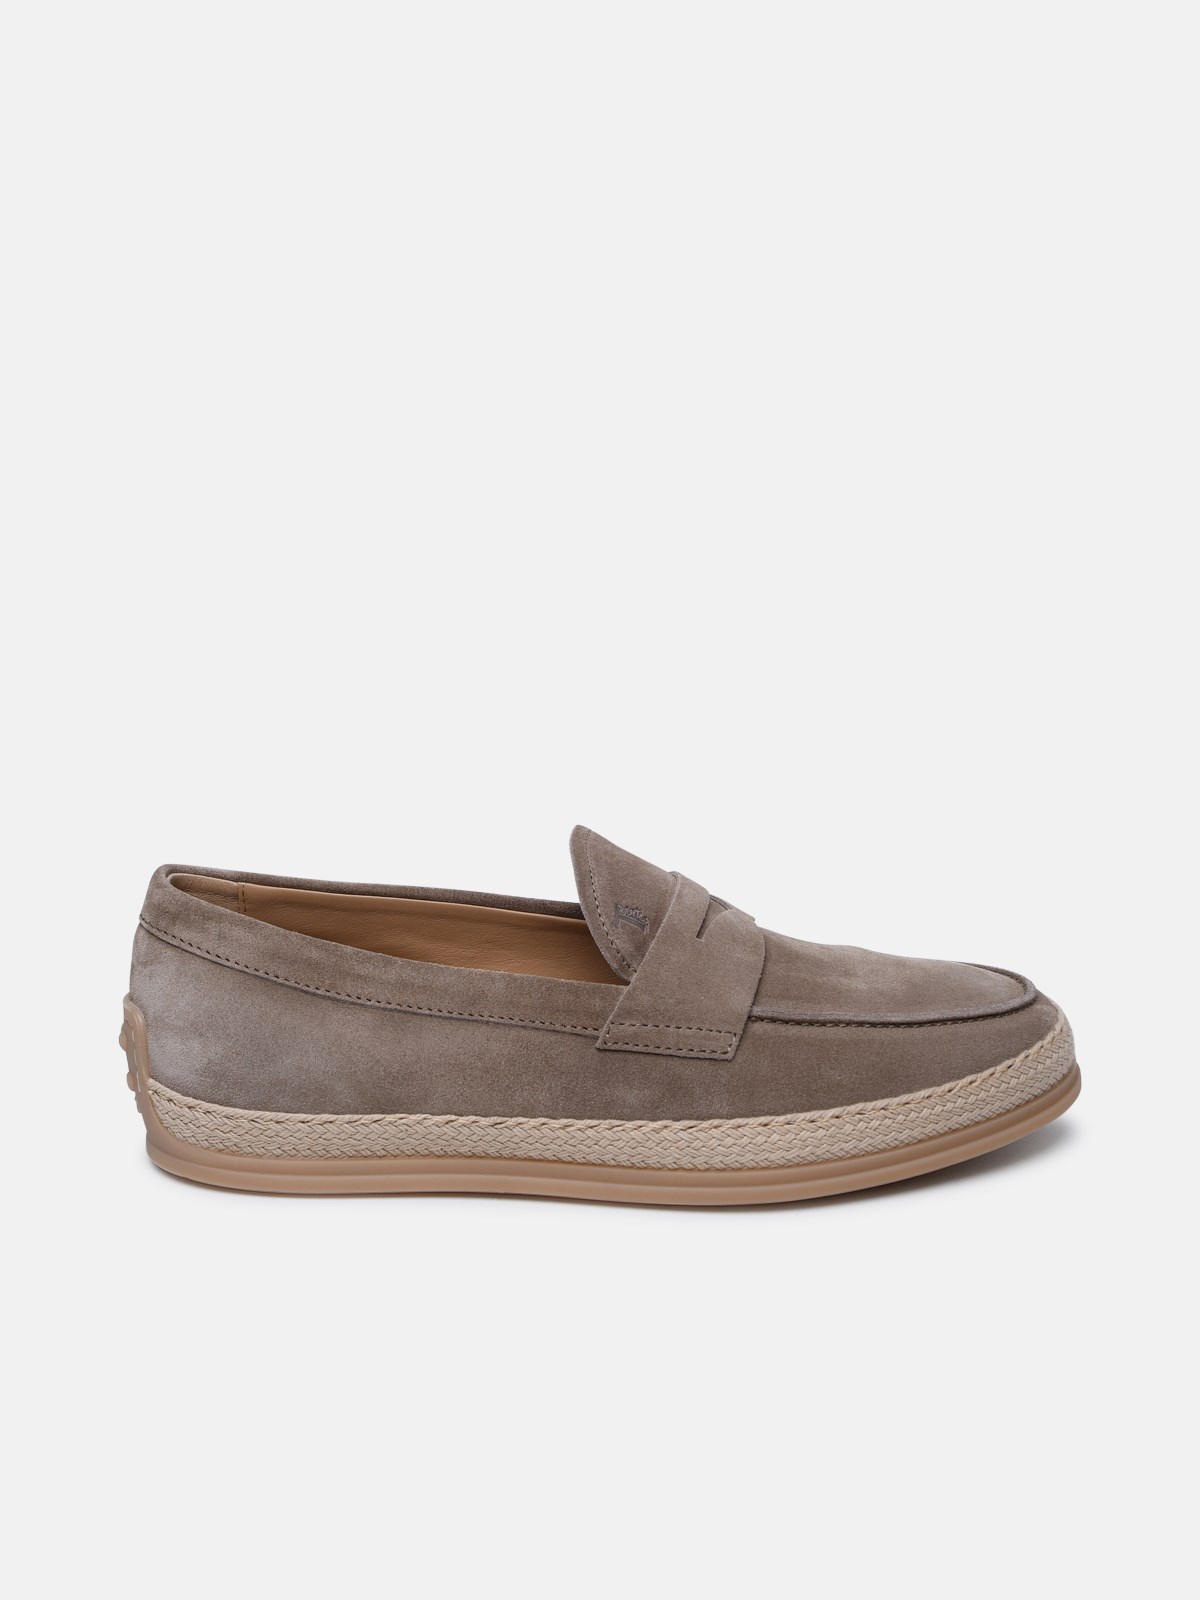 Tod's Beige Suede Loafers